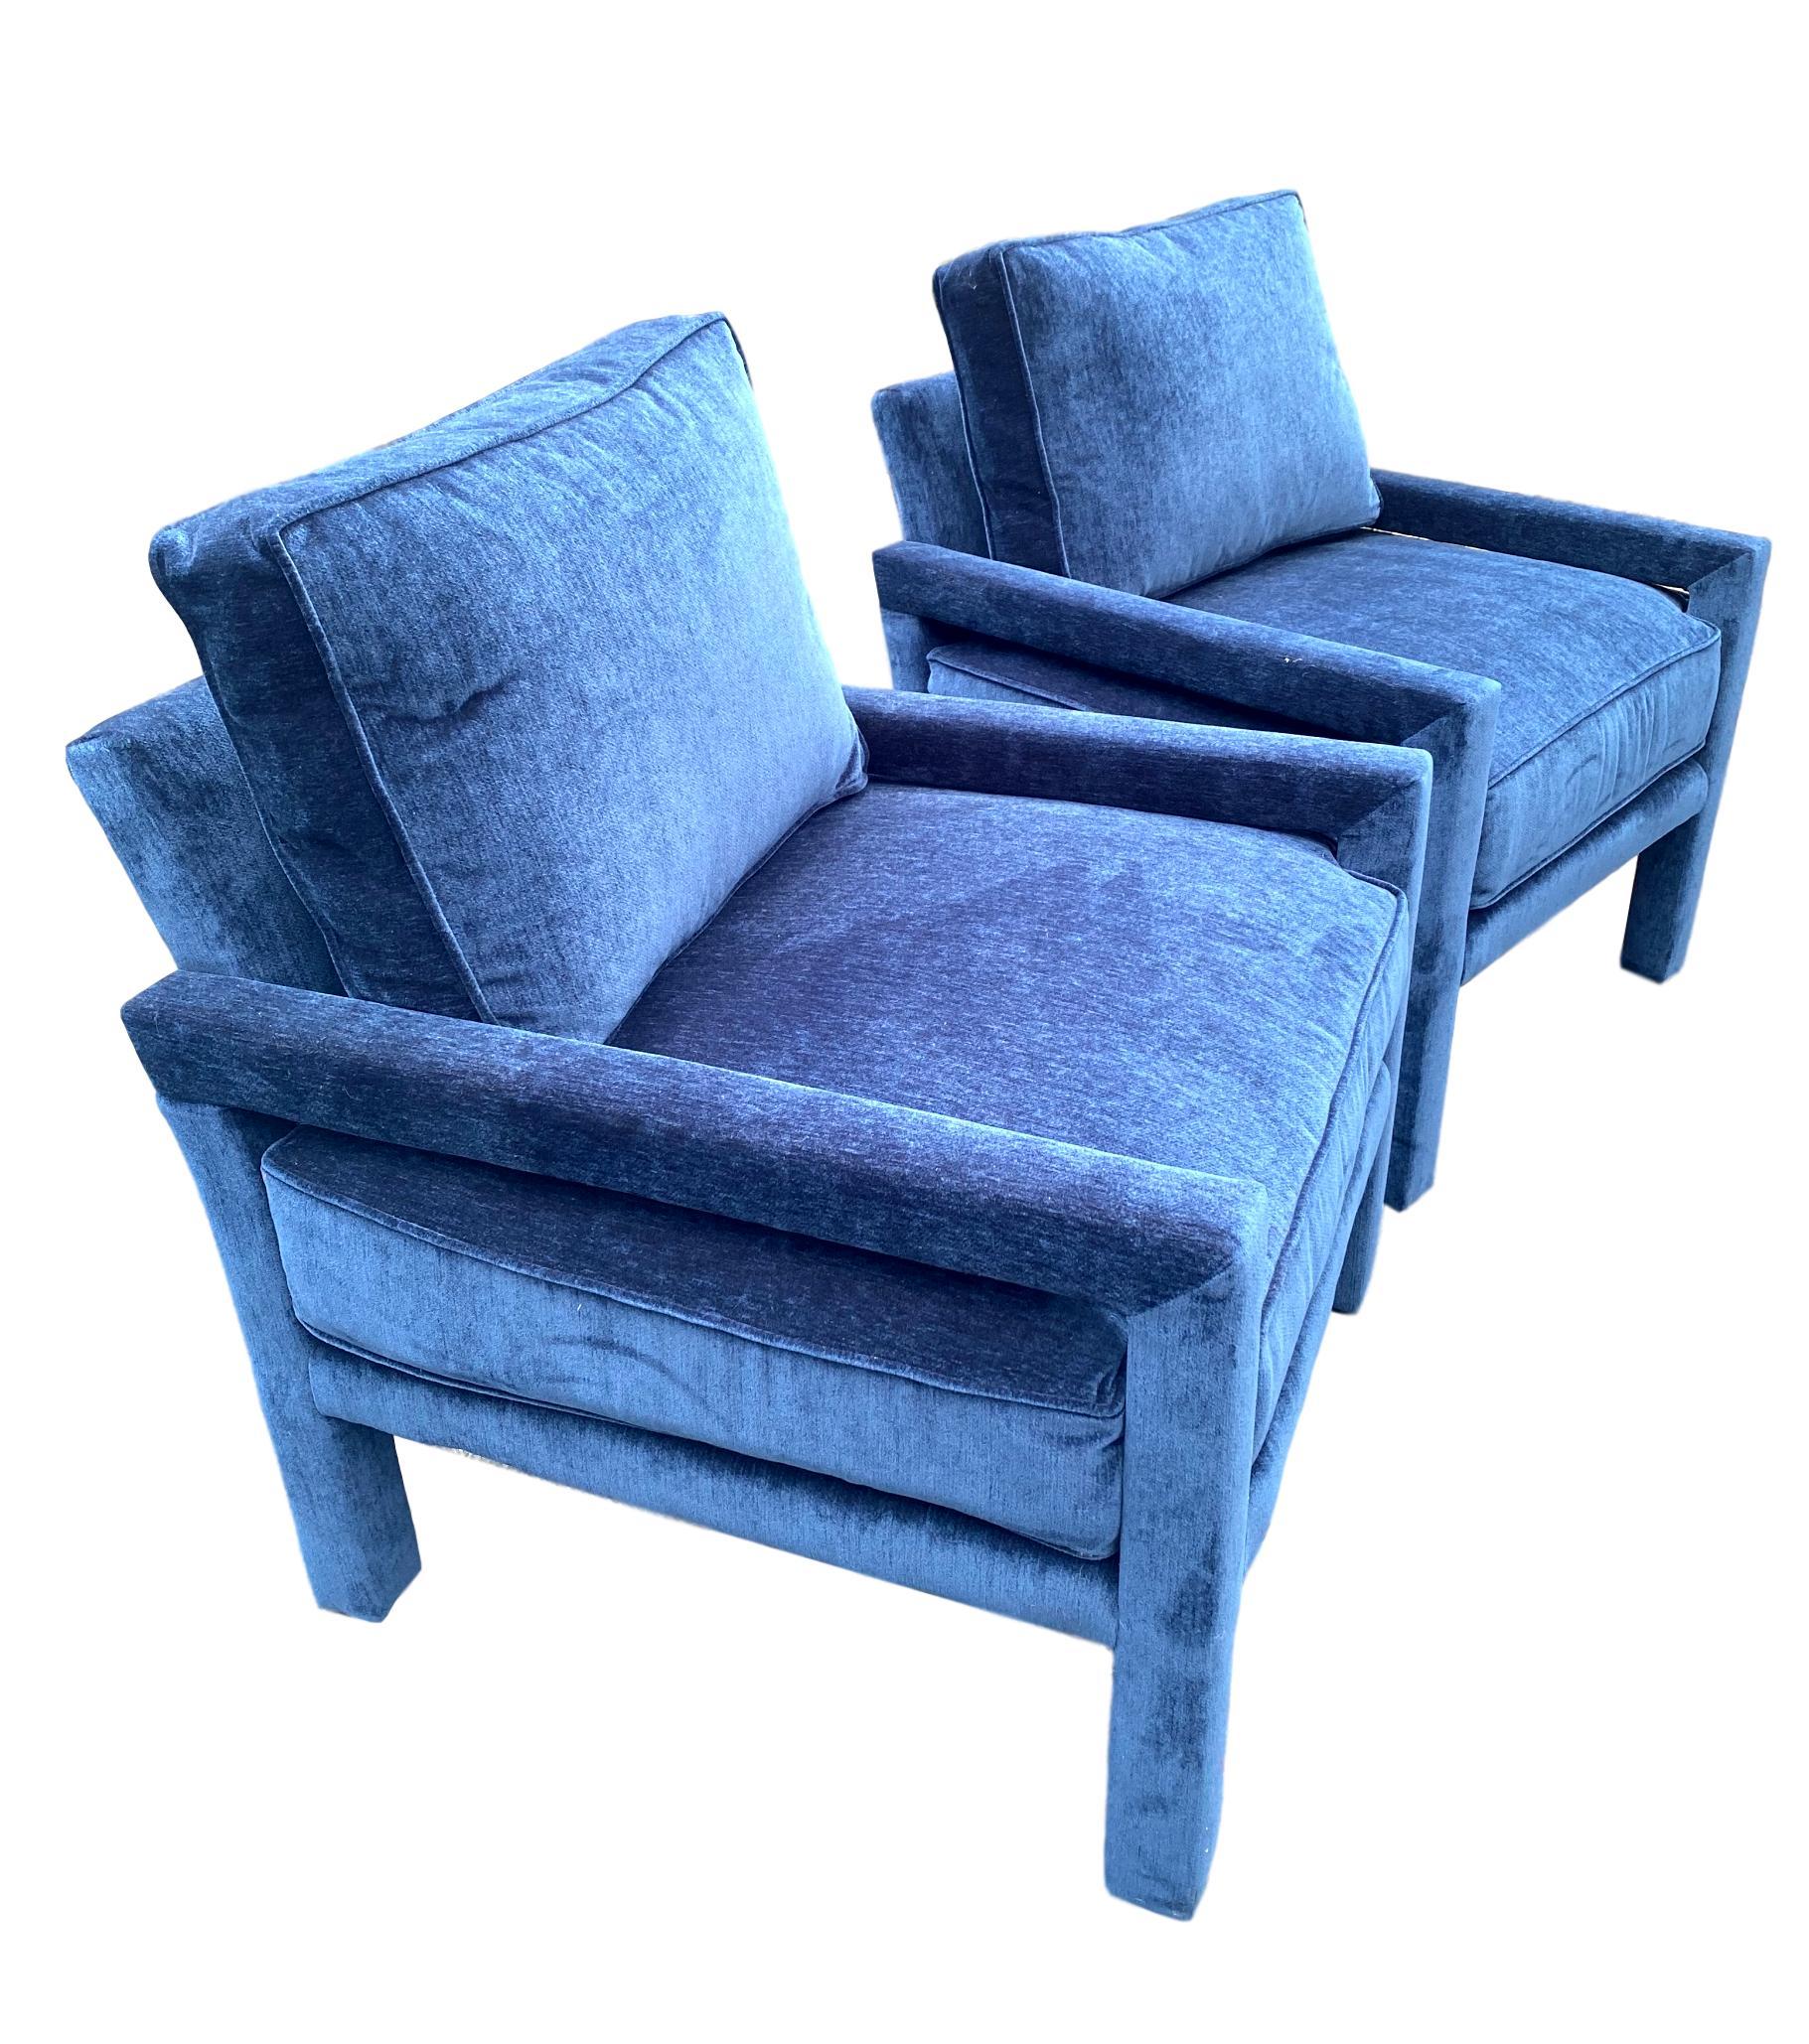 Hand-Crafted Pair of New Milo Baughman Style Iconic Parsons Chairs, Pantone Blue Velvet